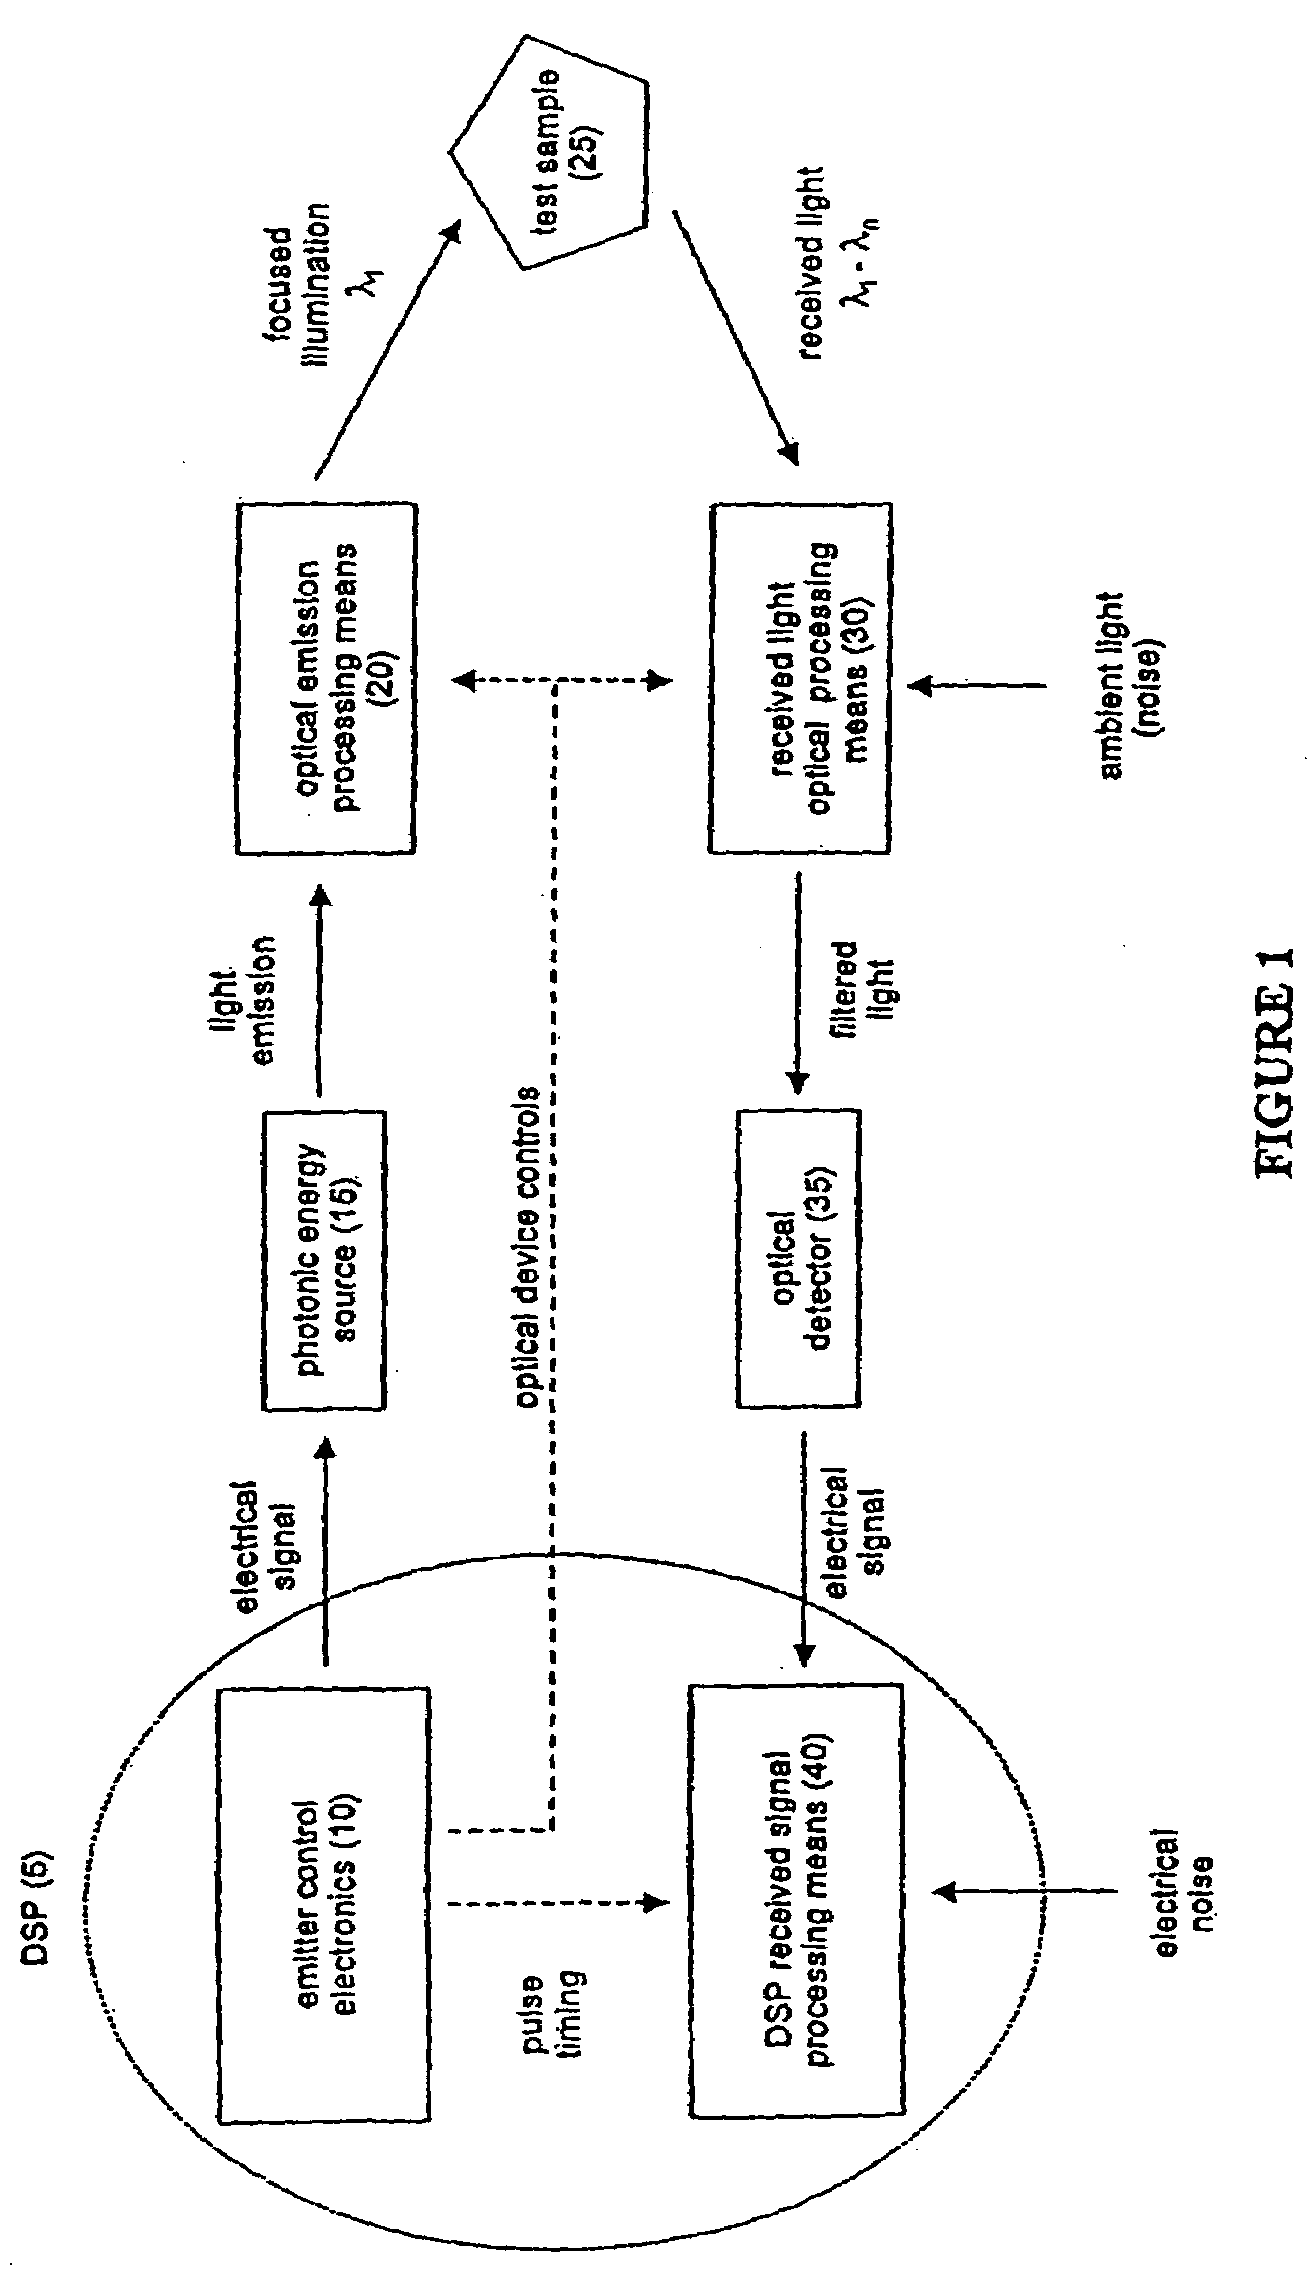 Spectrometer incorporating signal matched filtering